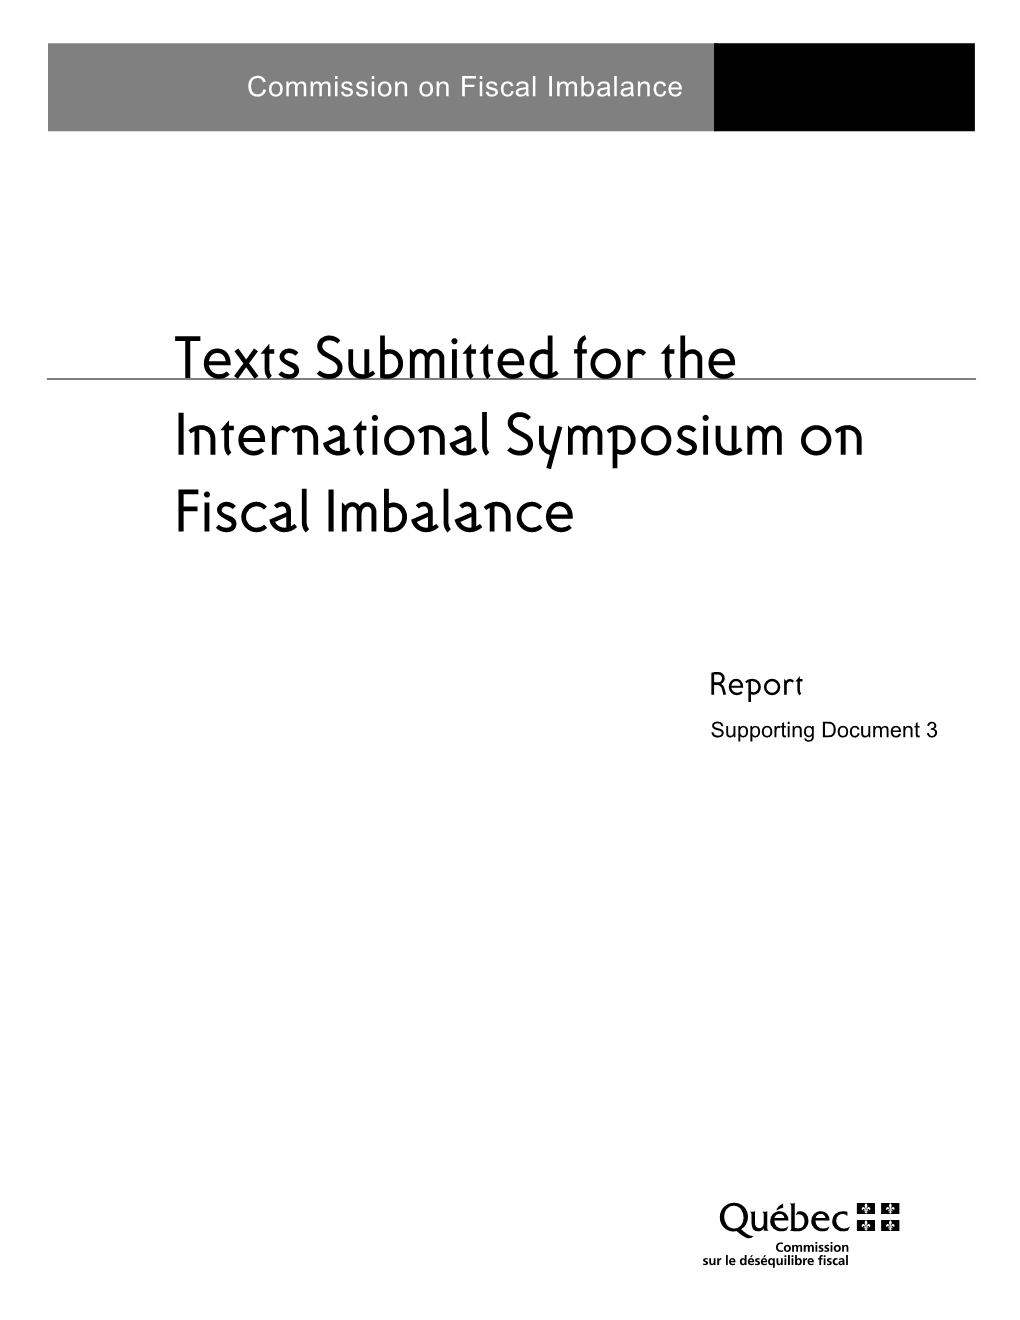 Texts Submitted for the International Symposium on Fiscal Imbalance